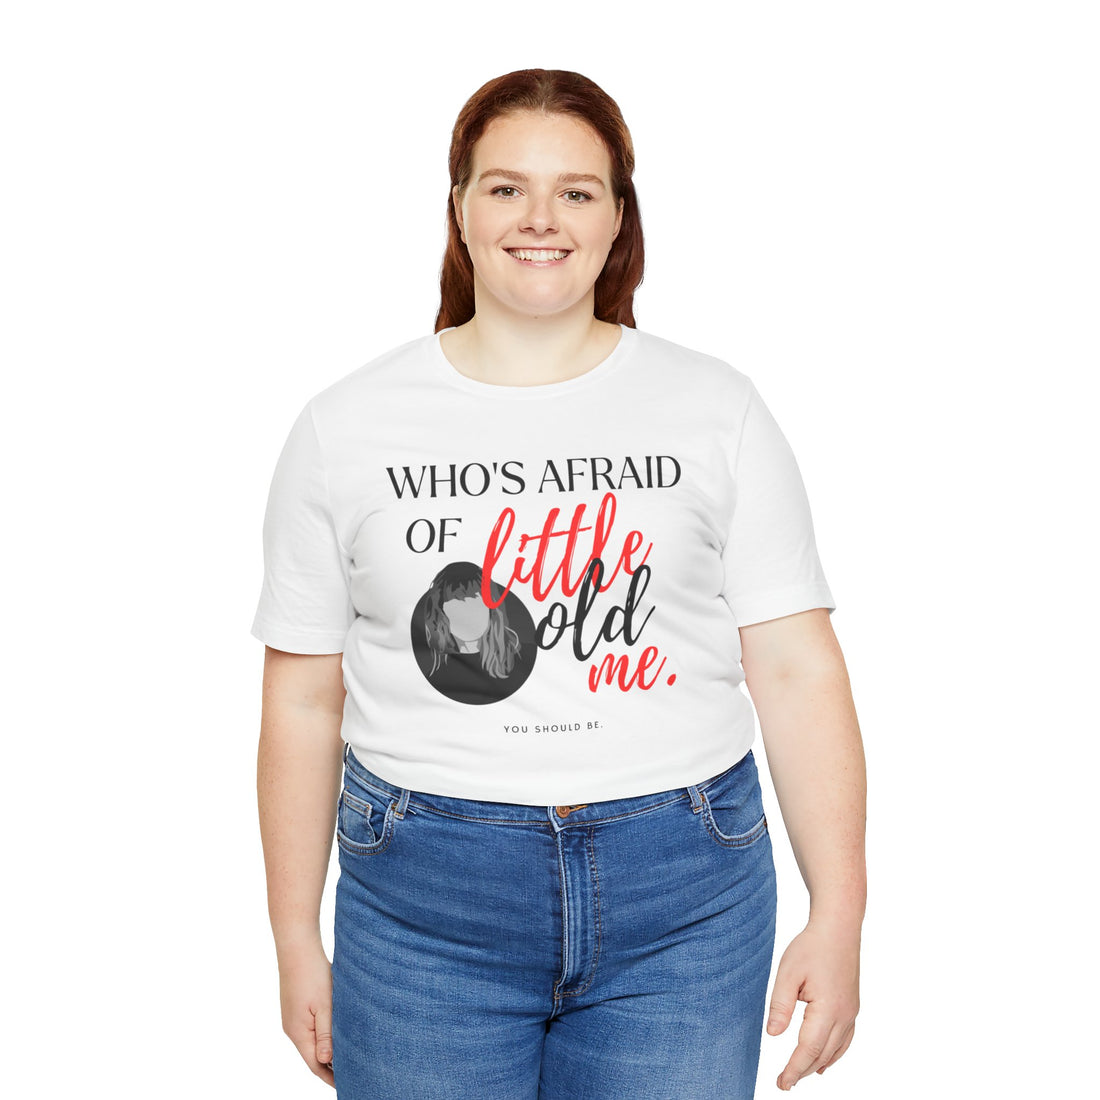 Who's Afraid of Little Old Me? TTPD Taylor Swift Lyric Tee